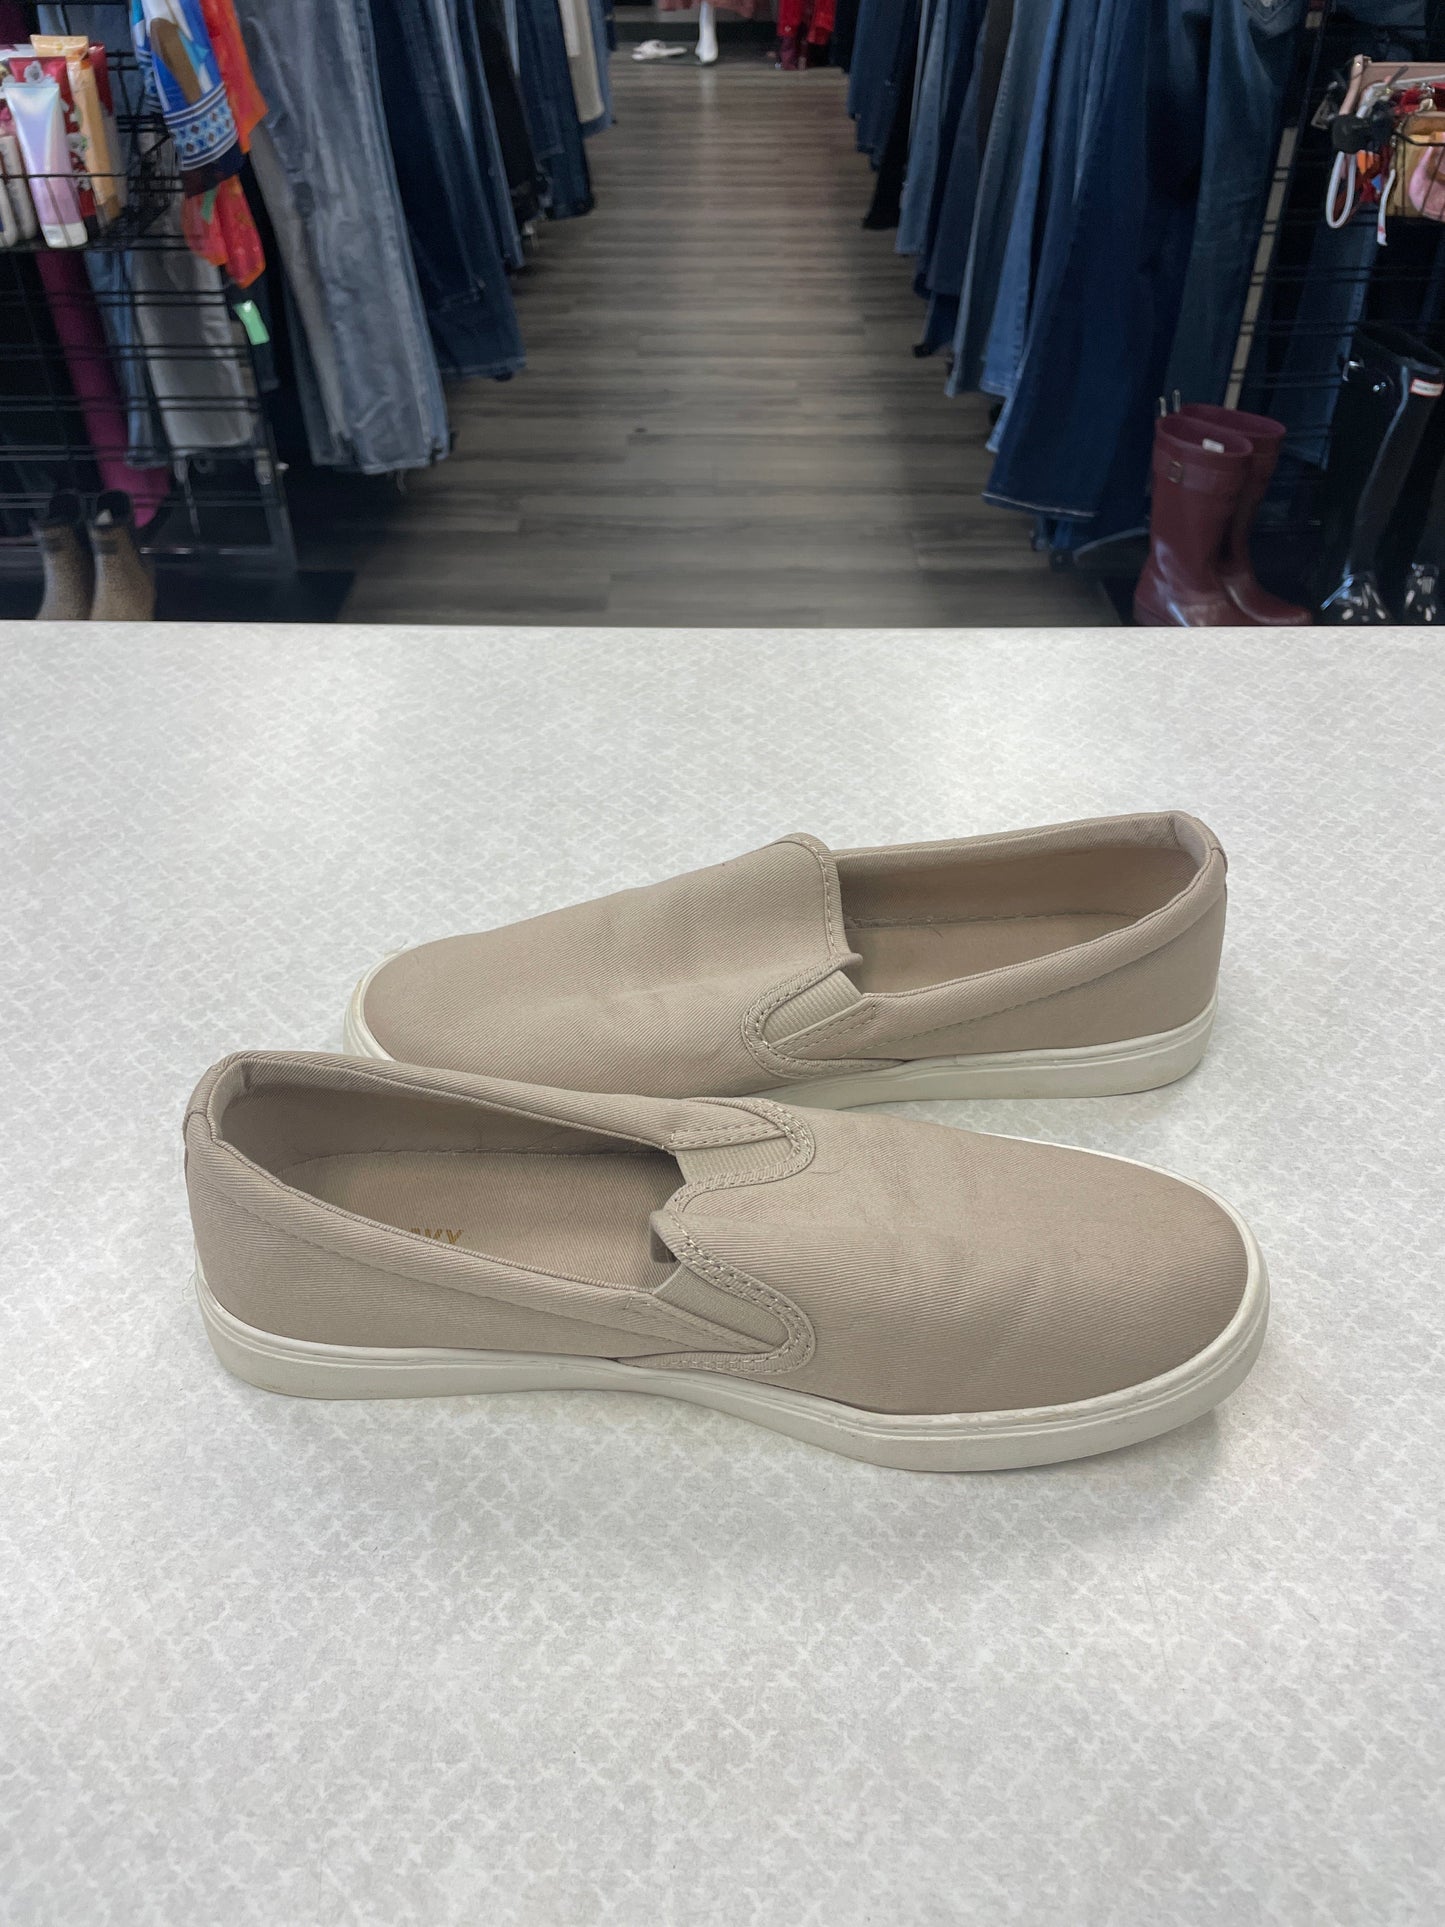 Tan Shoes Flats Old Navy, Size 8.5